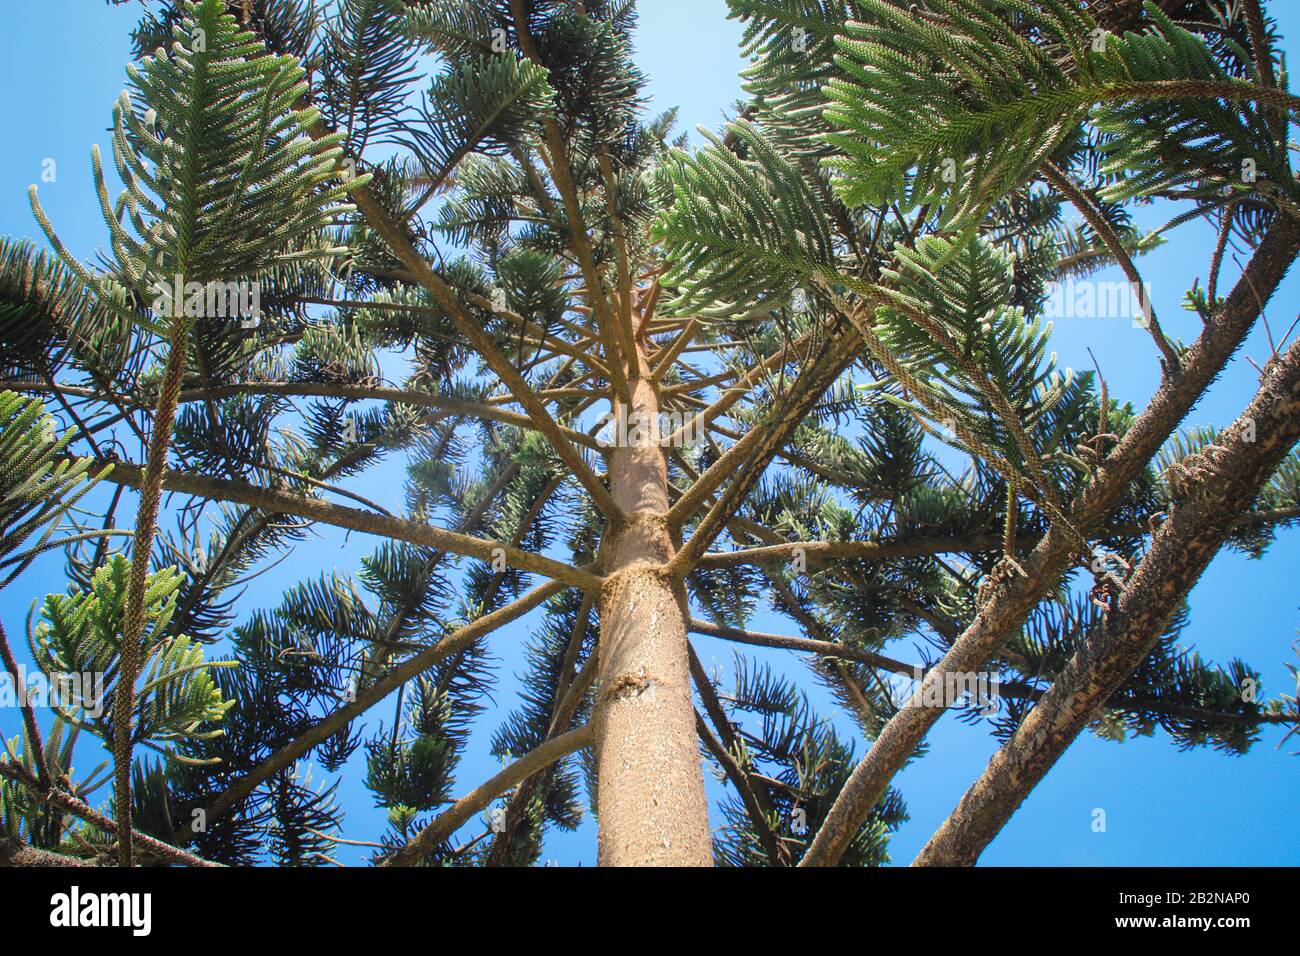 Branches, trunk and cone-shaped needles of Araucaria tree Stock Photo